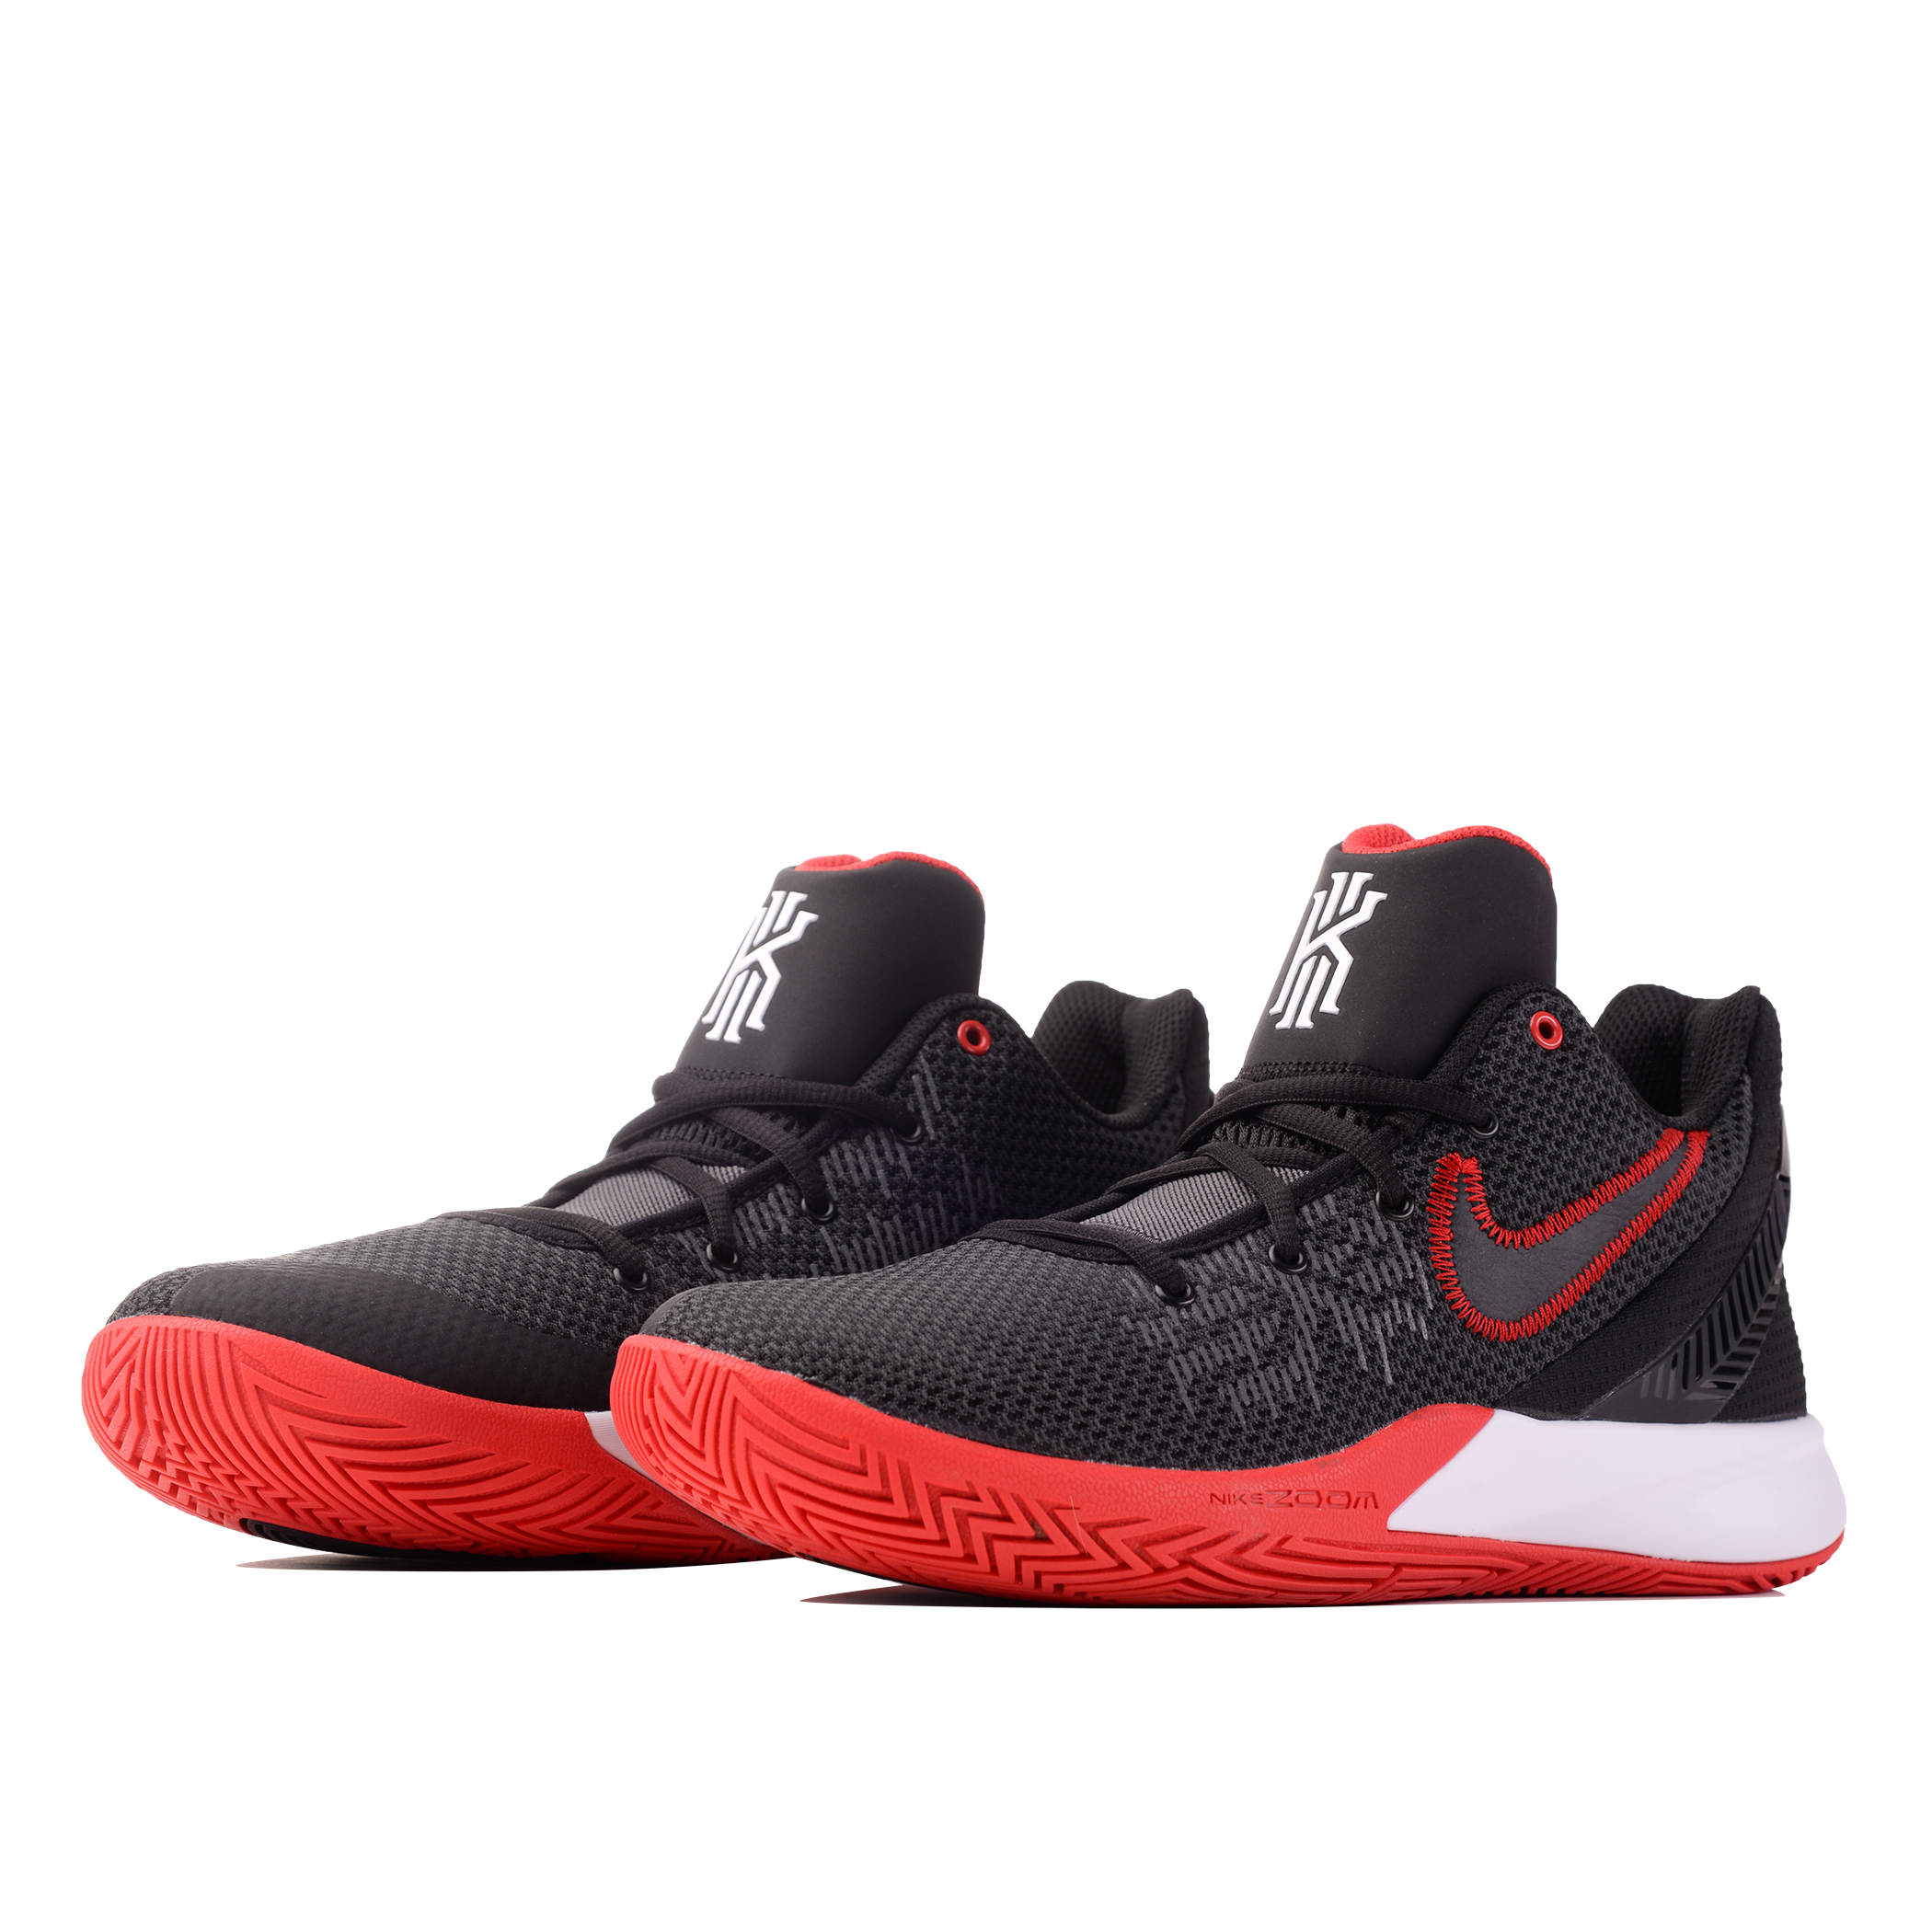 kyrie flytrap 2 red